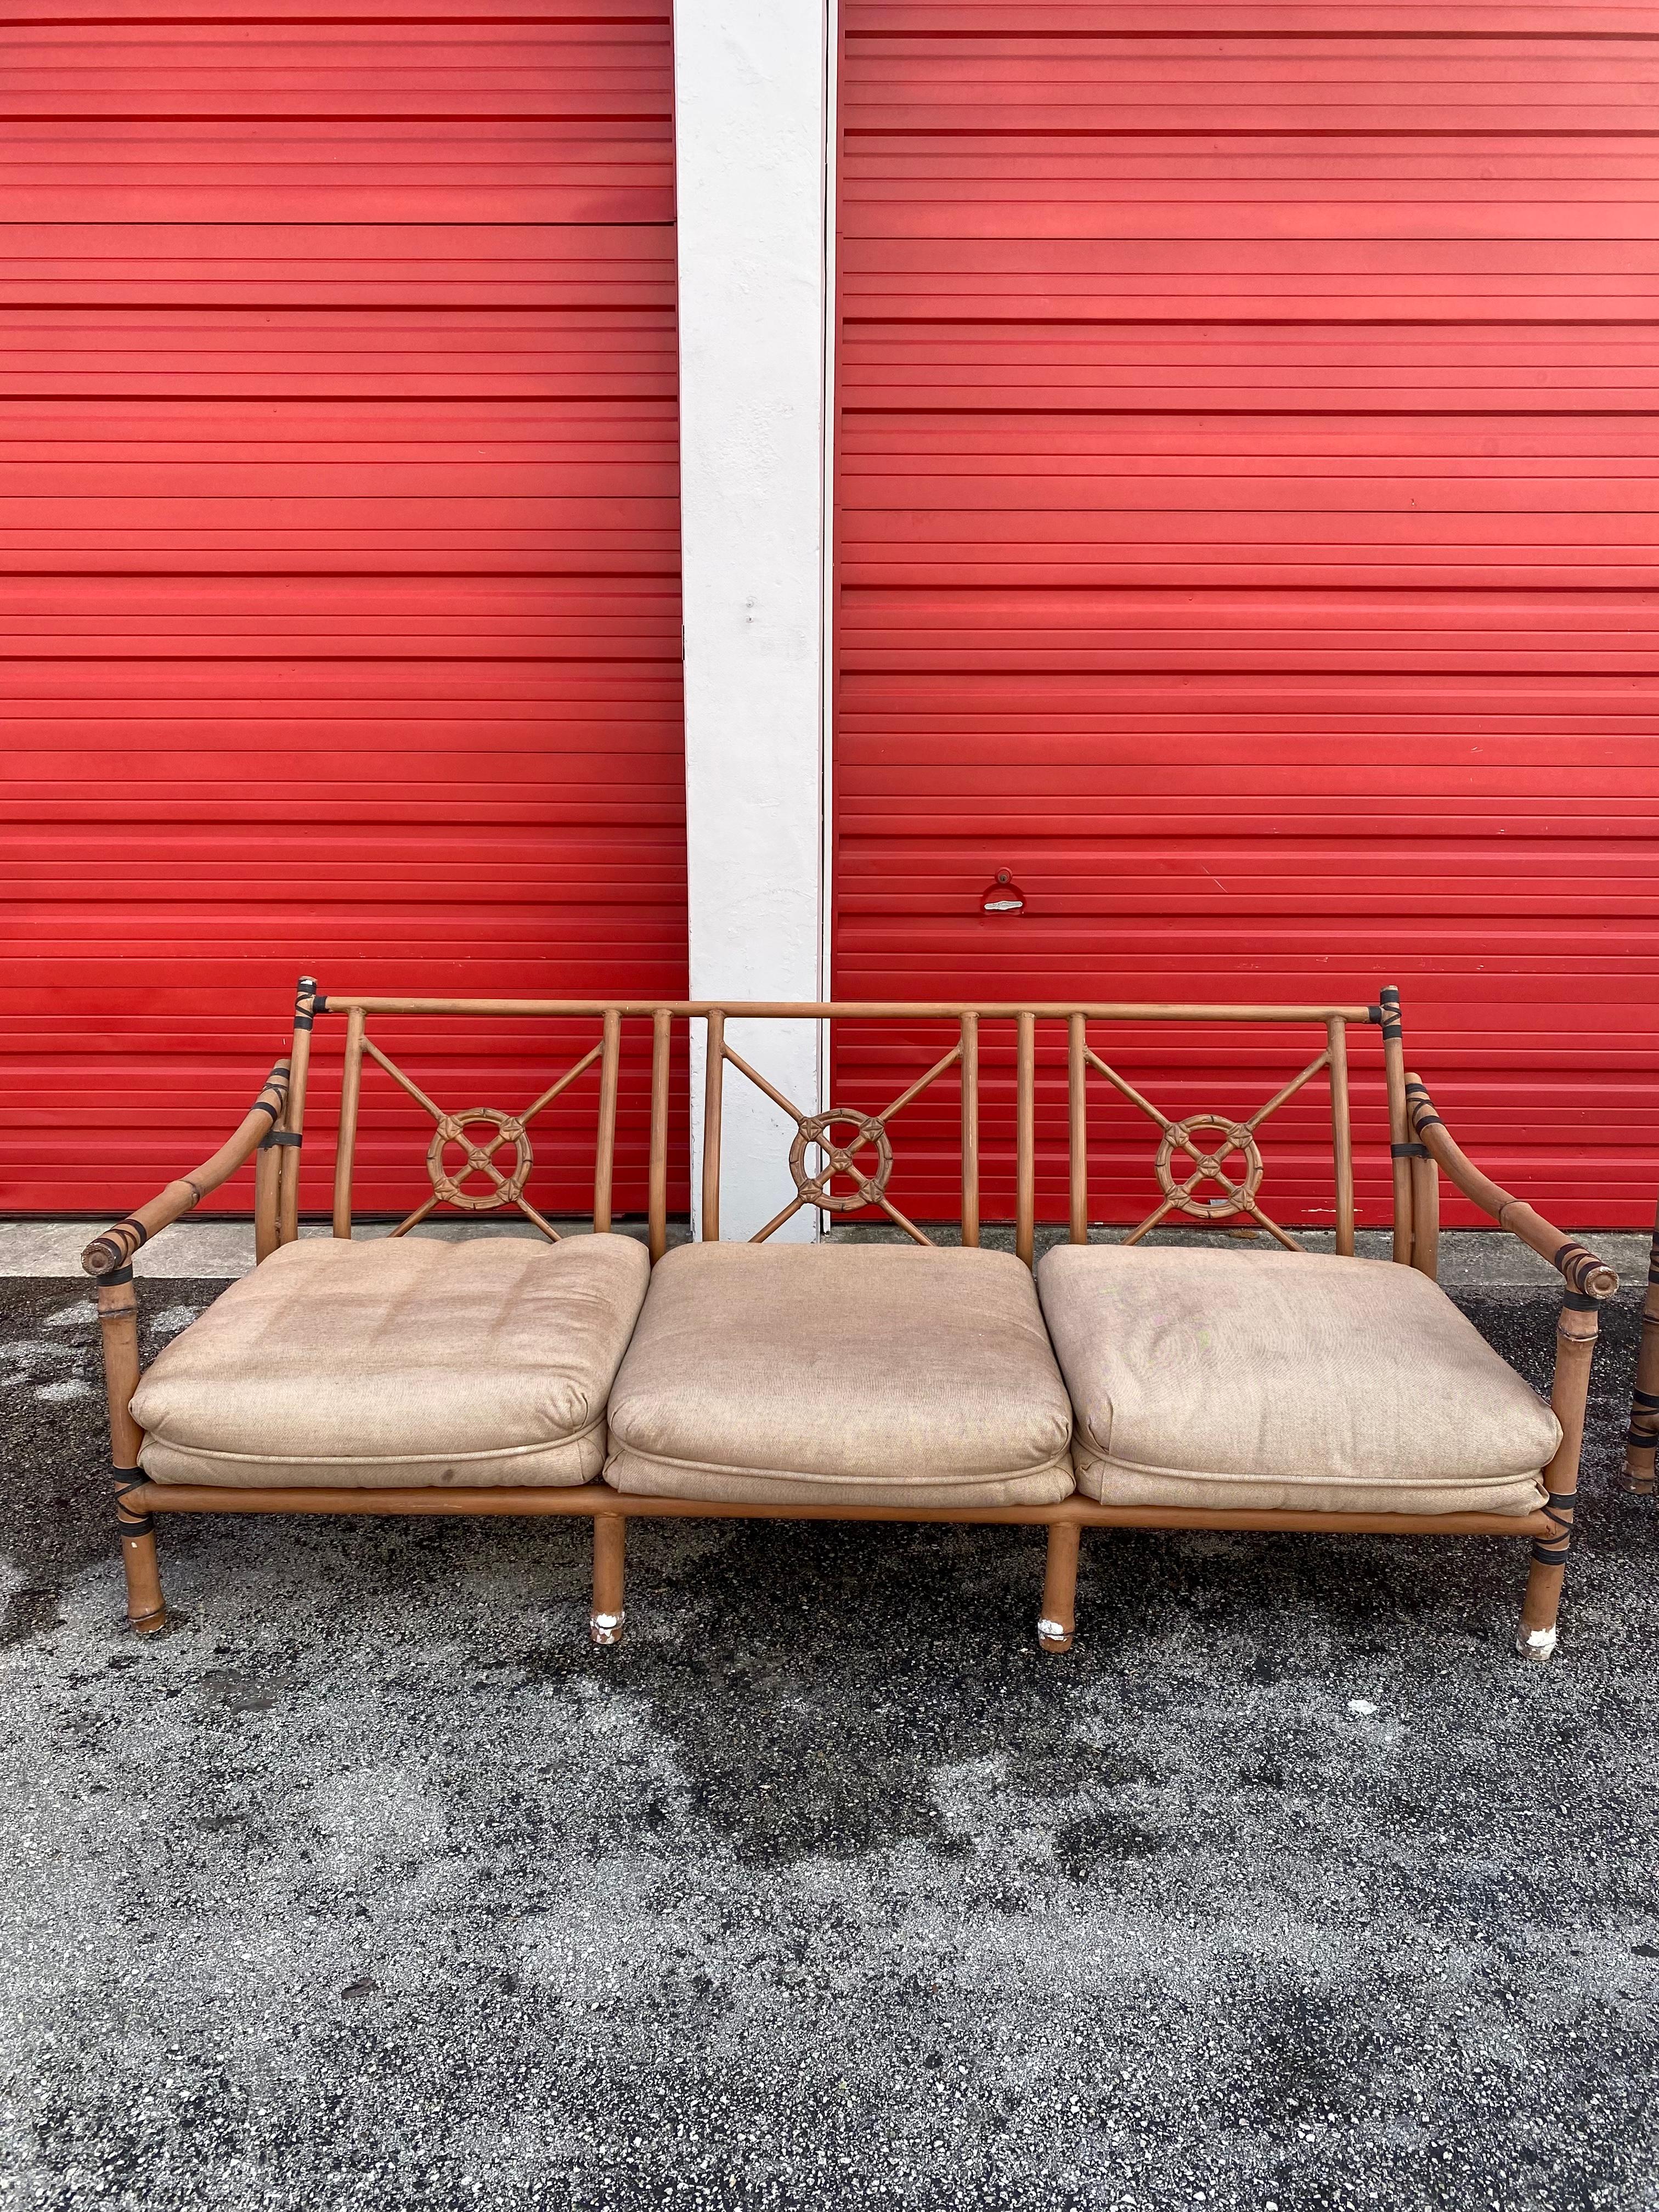 Late 20th Century 1970s  McQuire Target Back Faux Rattan Aluminum Sofa Chair Set For Sale